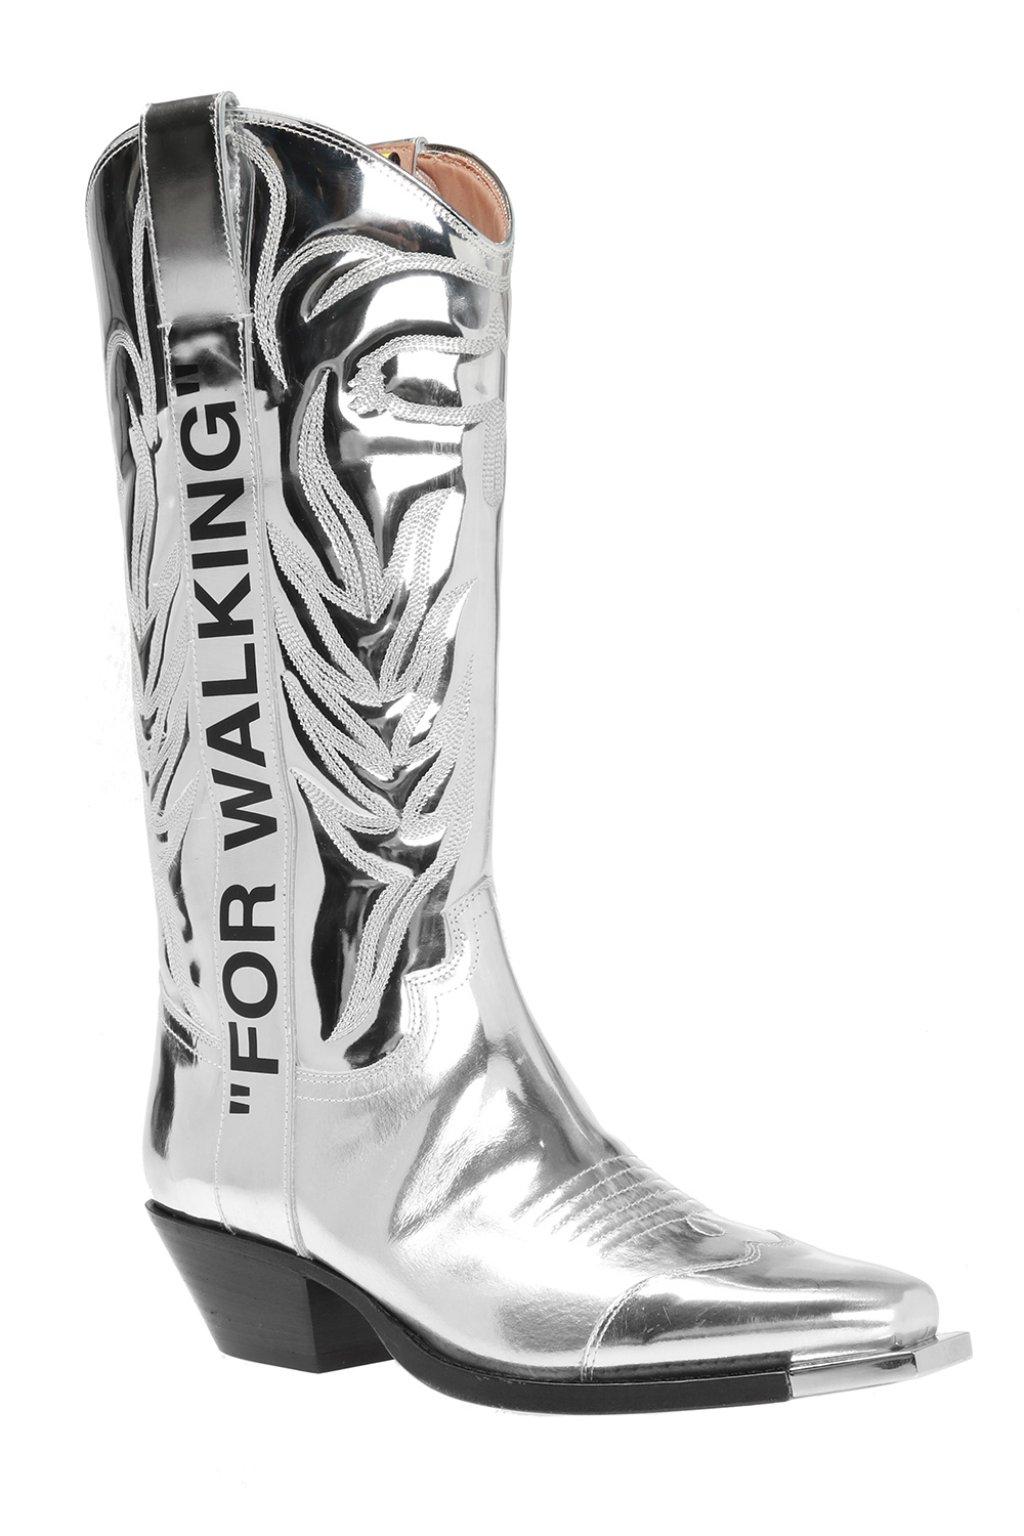 Off-White c/o Virgil Abloh Leather Heeled Knee-high Boots in Silver ...